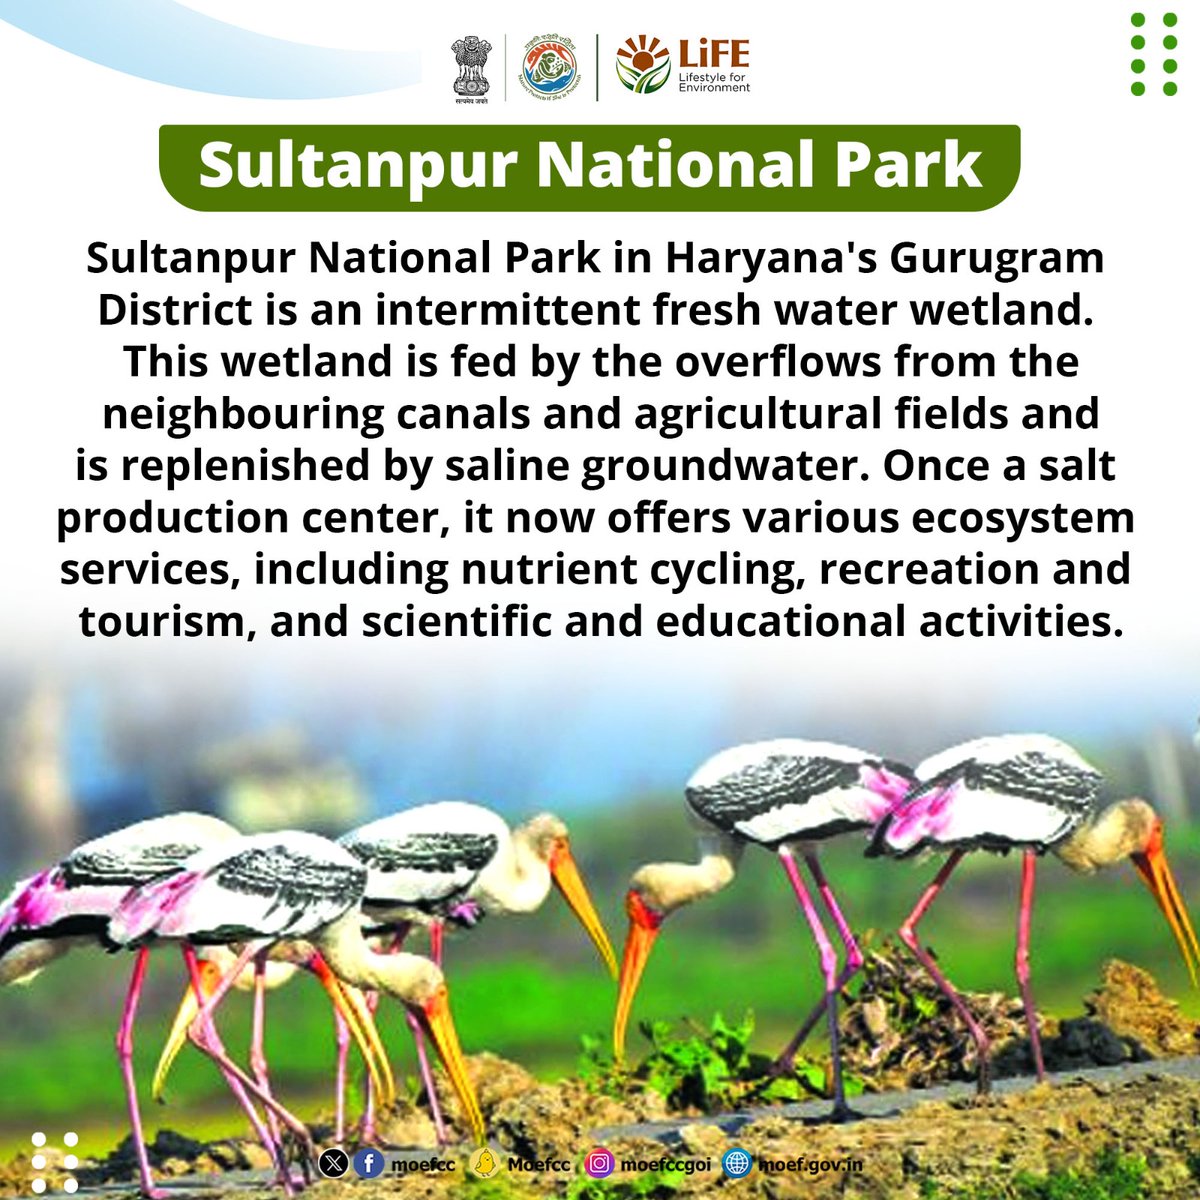 Discovering India's Ramsar Sites

Day 64: Sultanpur National Park

From wetlands to wildlife, each site is a unique haven for nature. Let's celebrate and safeguard these vital ecosystems together!

#RamsarSites #MissionLiFE #ProPlanetPeople